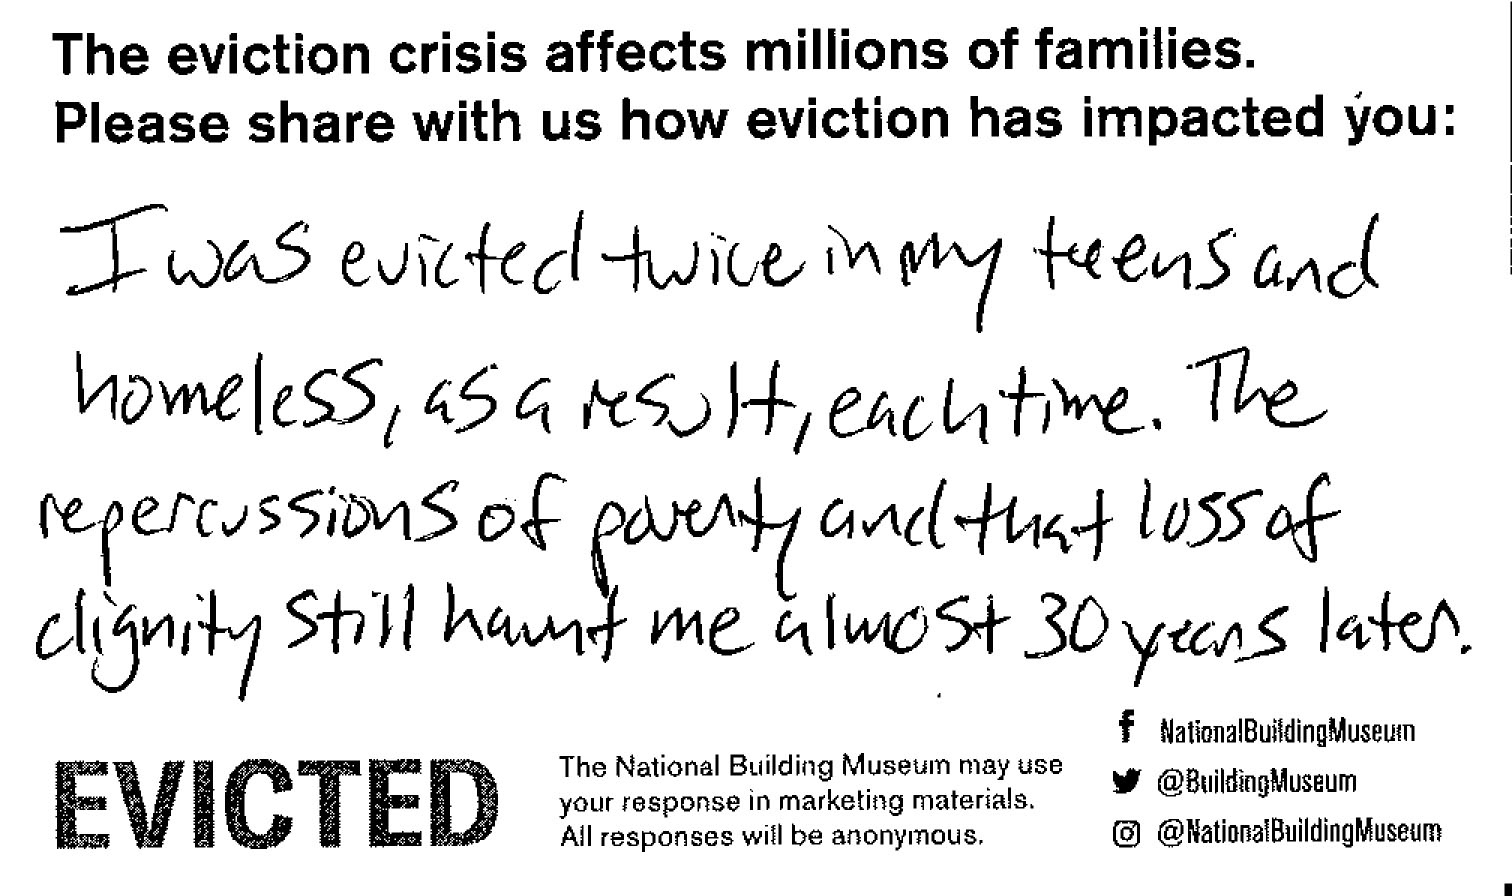 I was evicted twice in my teens and homeless, as a result, each time. The repercussions of poverty and that loss of dignity still haunt me almost 30 years later.